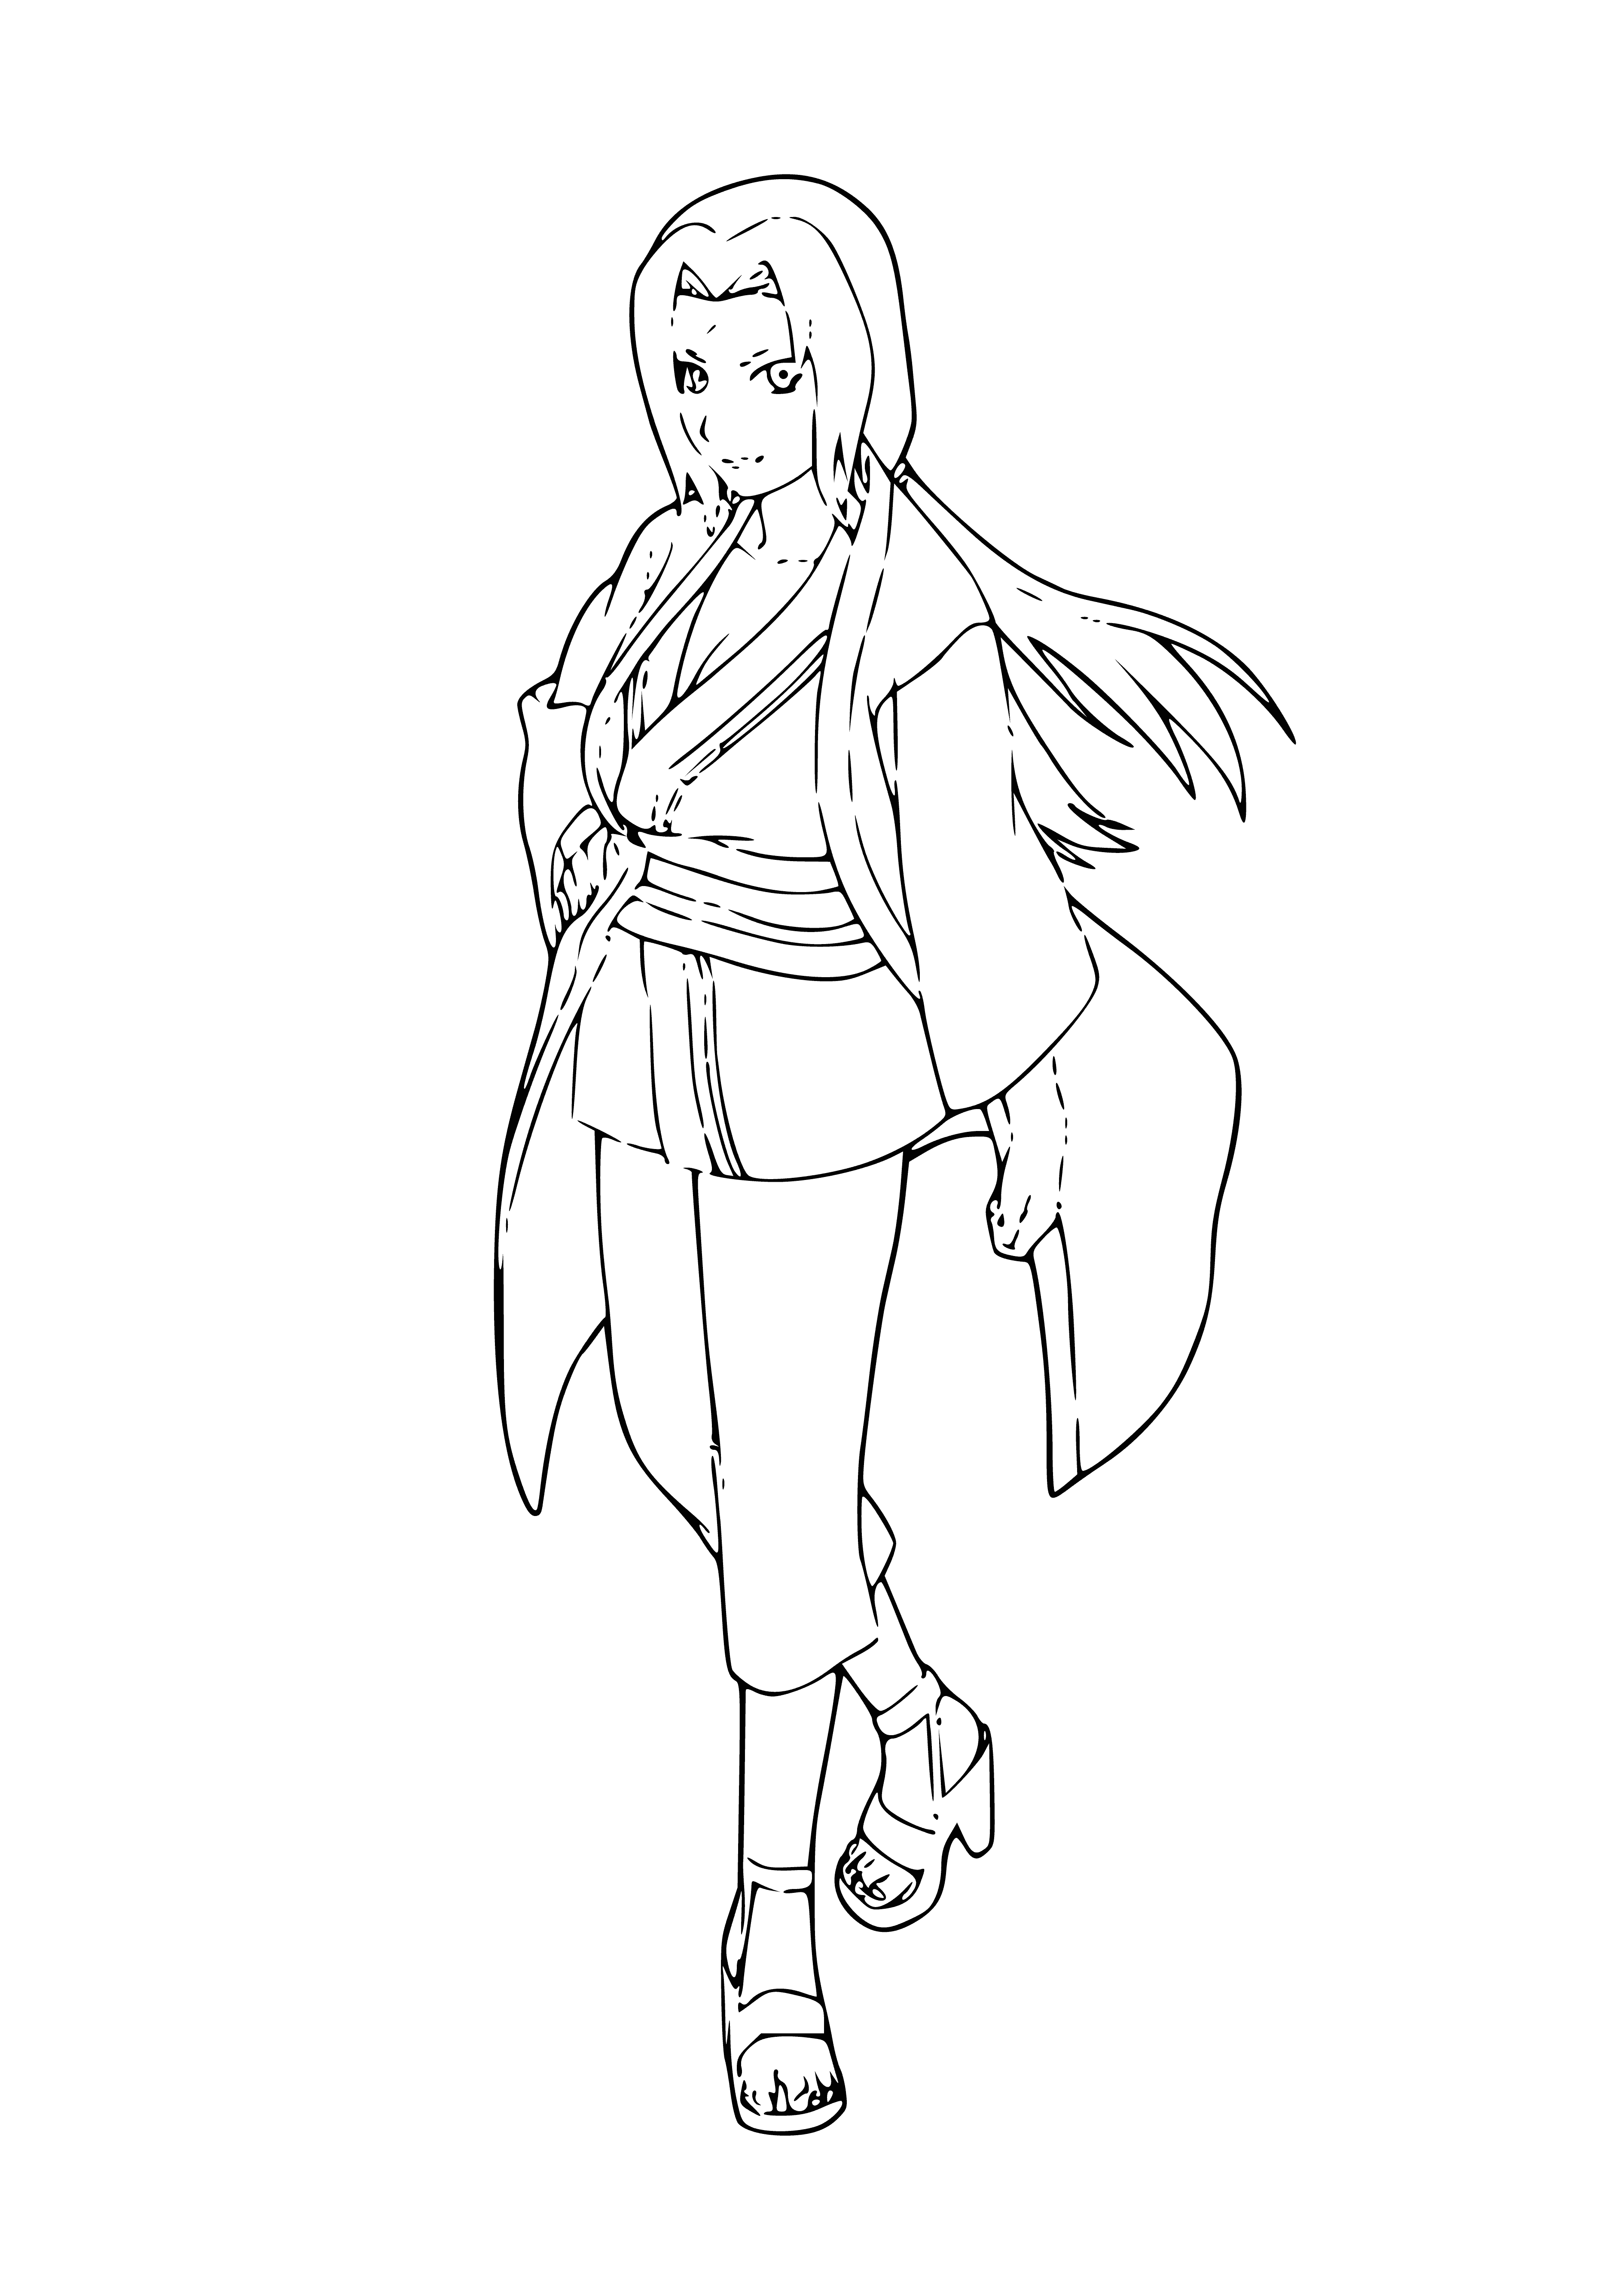 Cunade coloring page